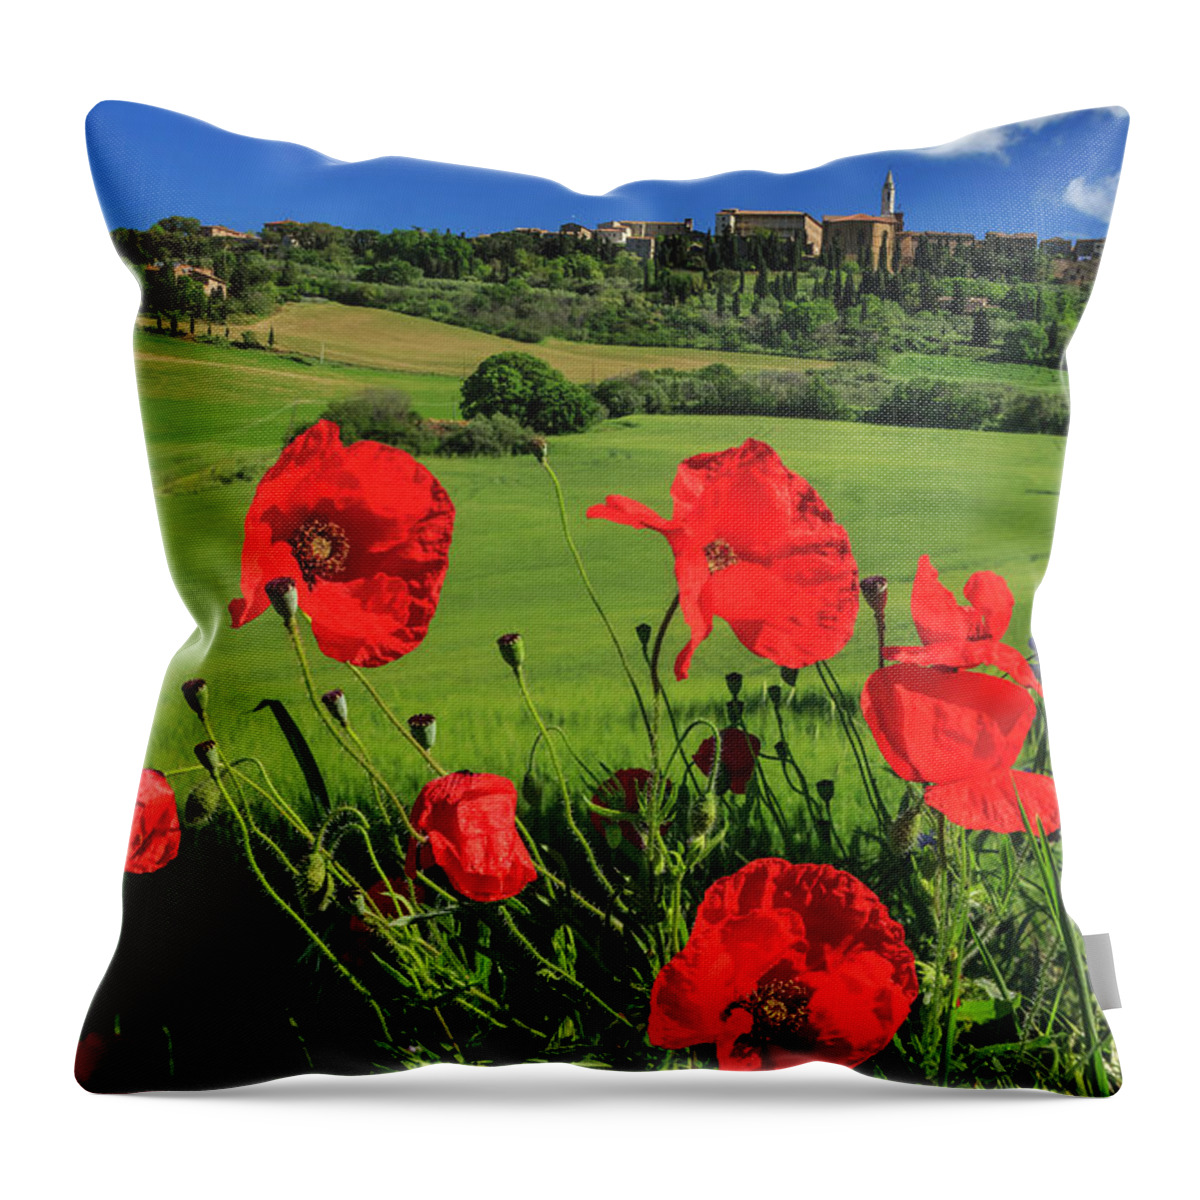 Estock Throw Pillow featuring the digital art Italy, Tuscany, Orcia Valley #5 by Maurizio Rellini